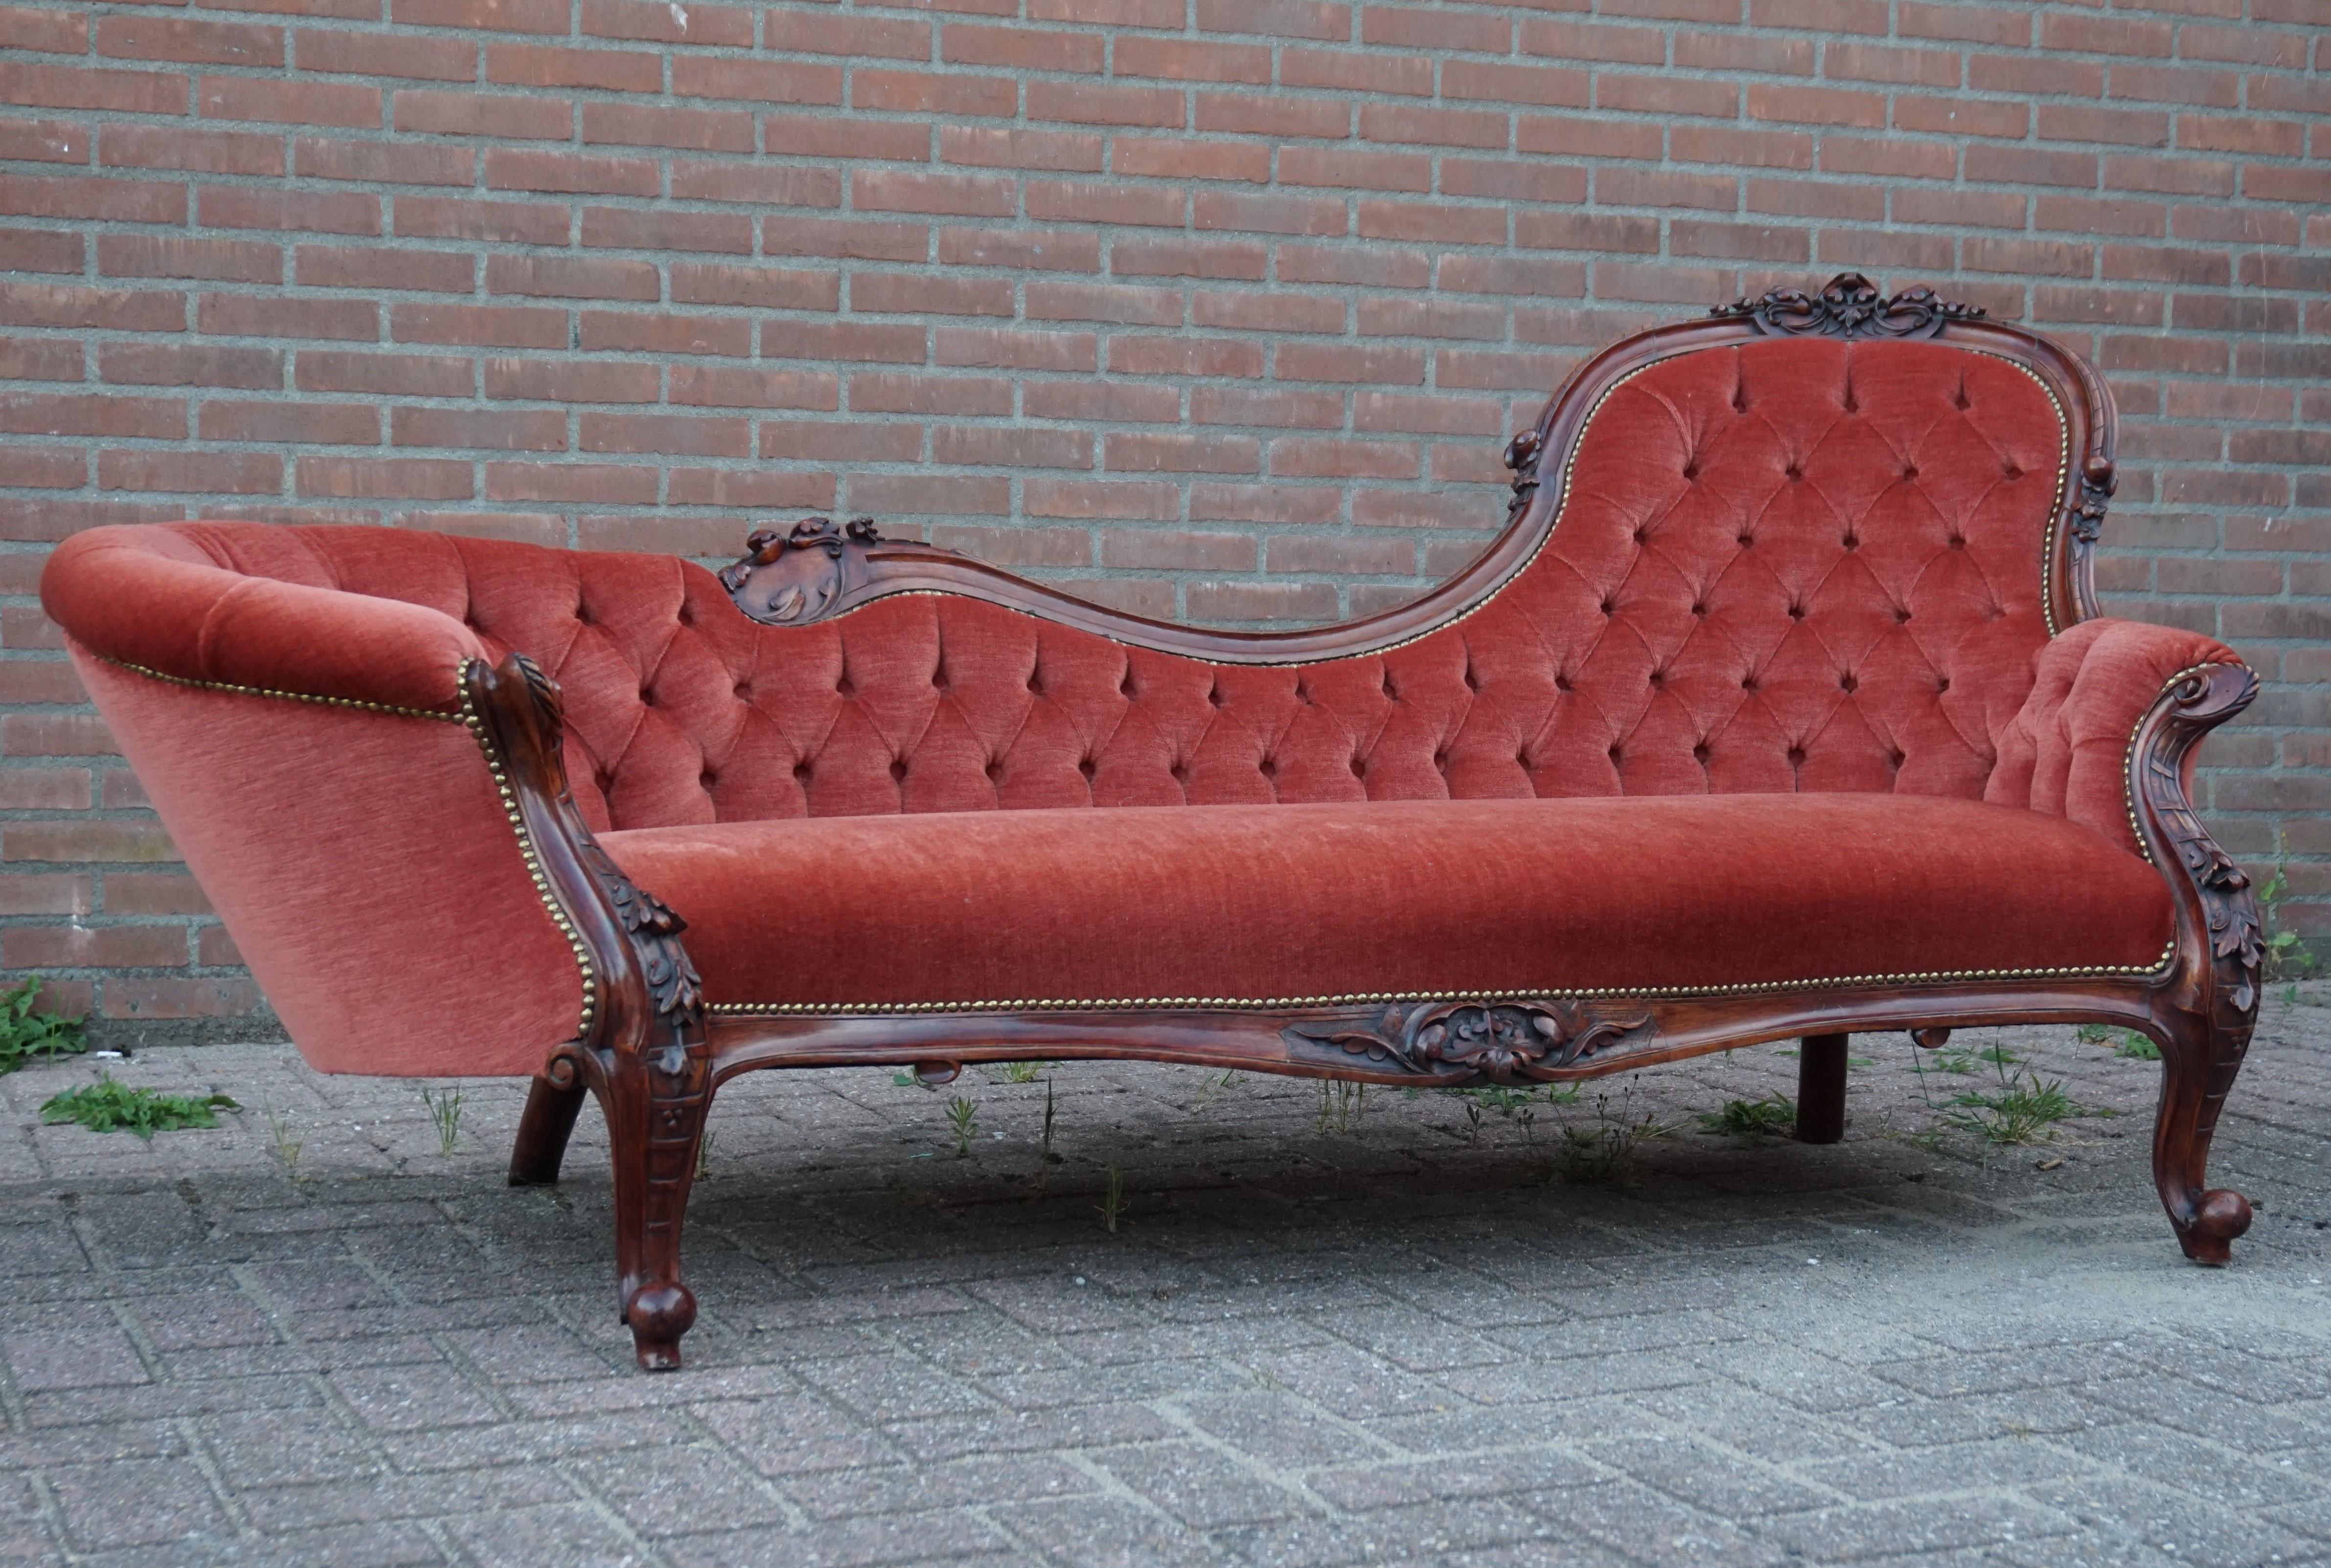 Stunning Design and Excellent Condition Antique Chaise Longue / Relaxing Chair 8